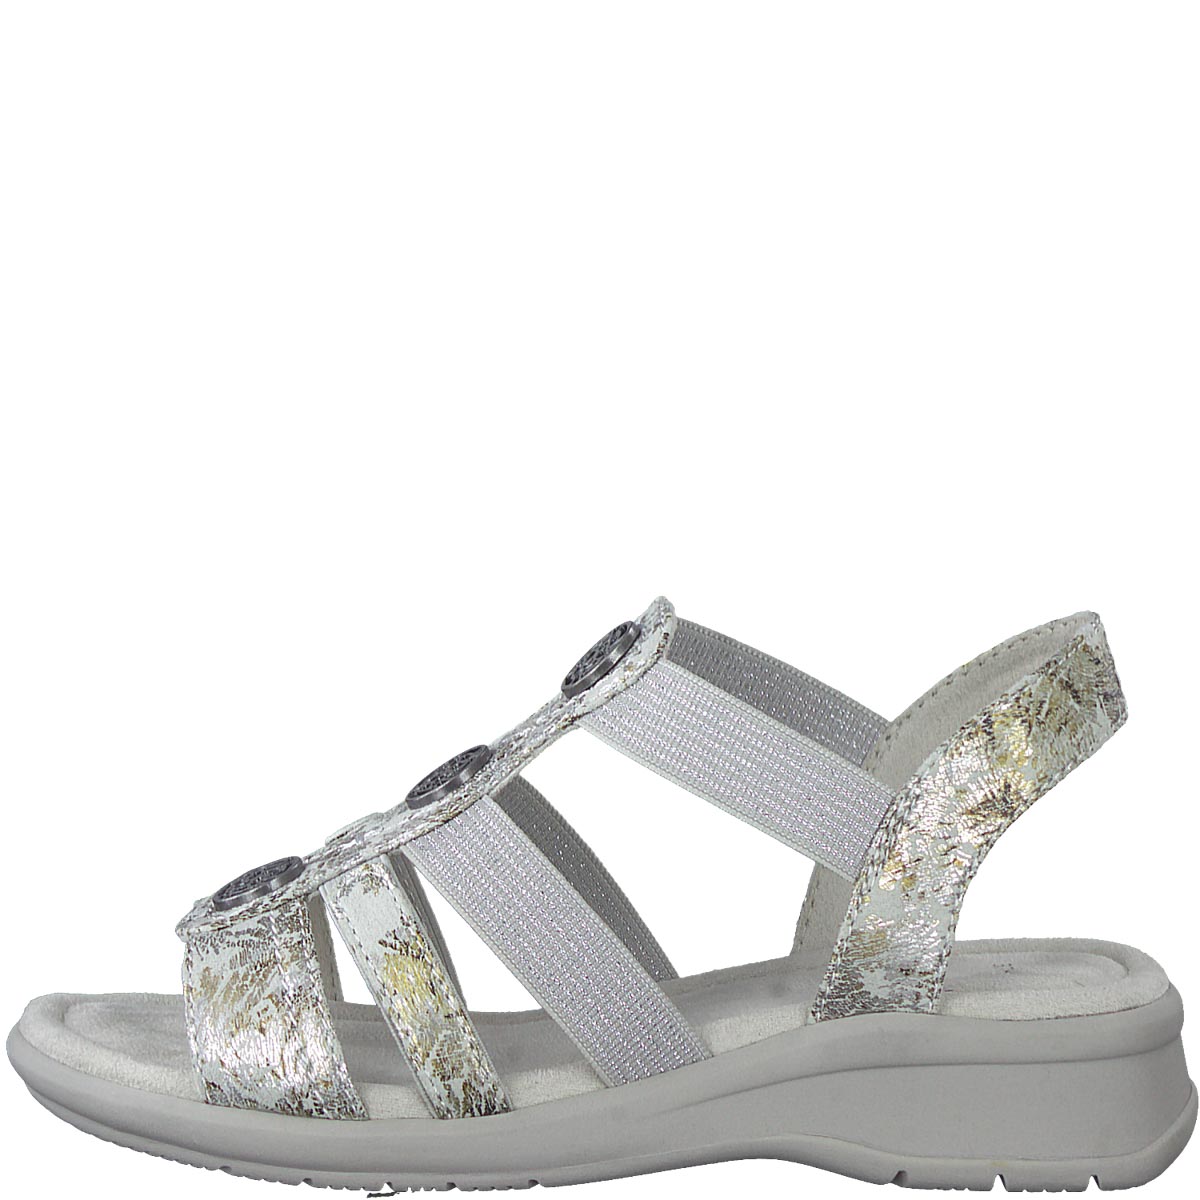 Grey Flower Design Low Sole Summer Sandals with Elasticated Straps